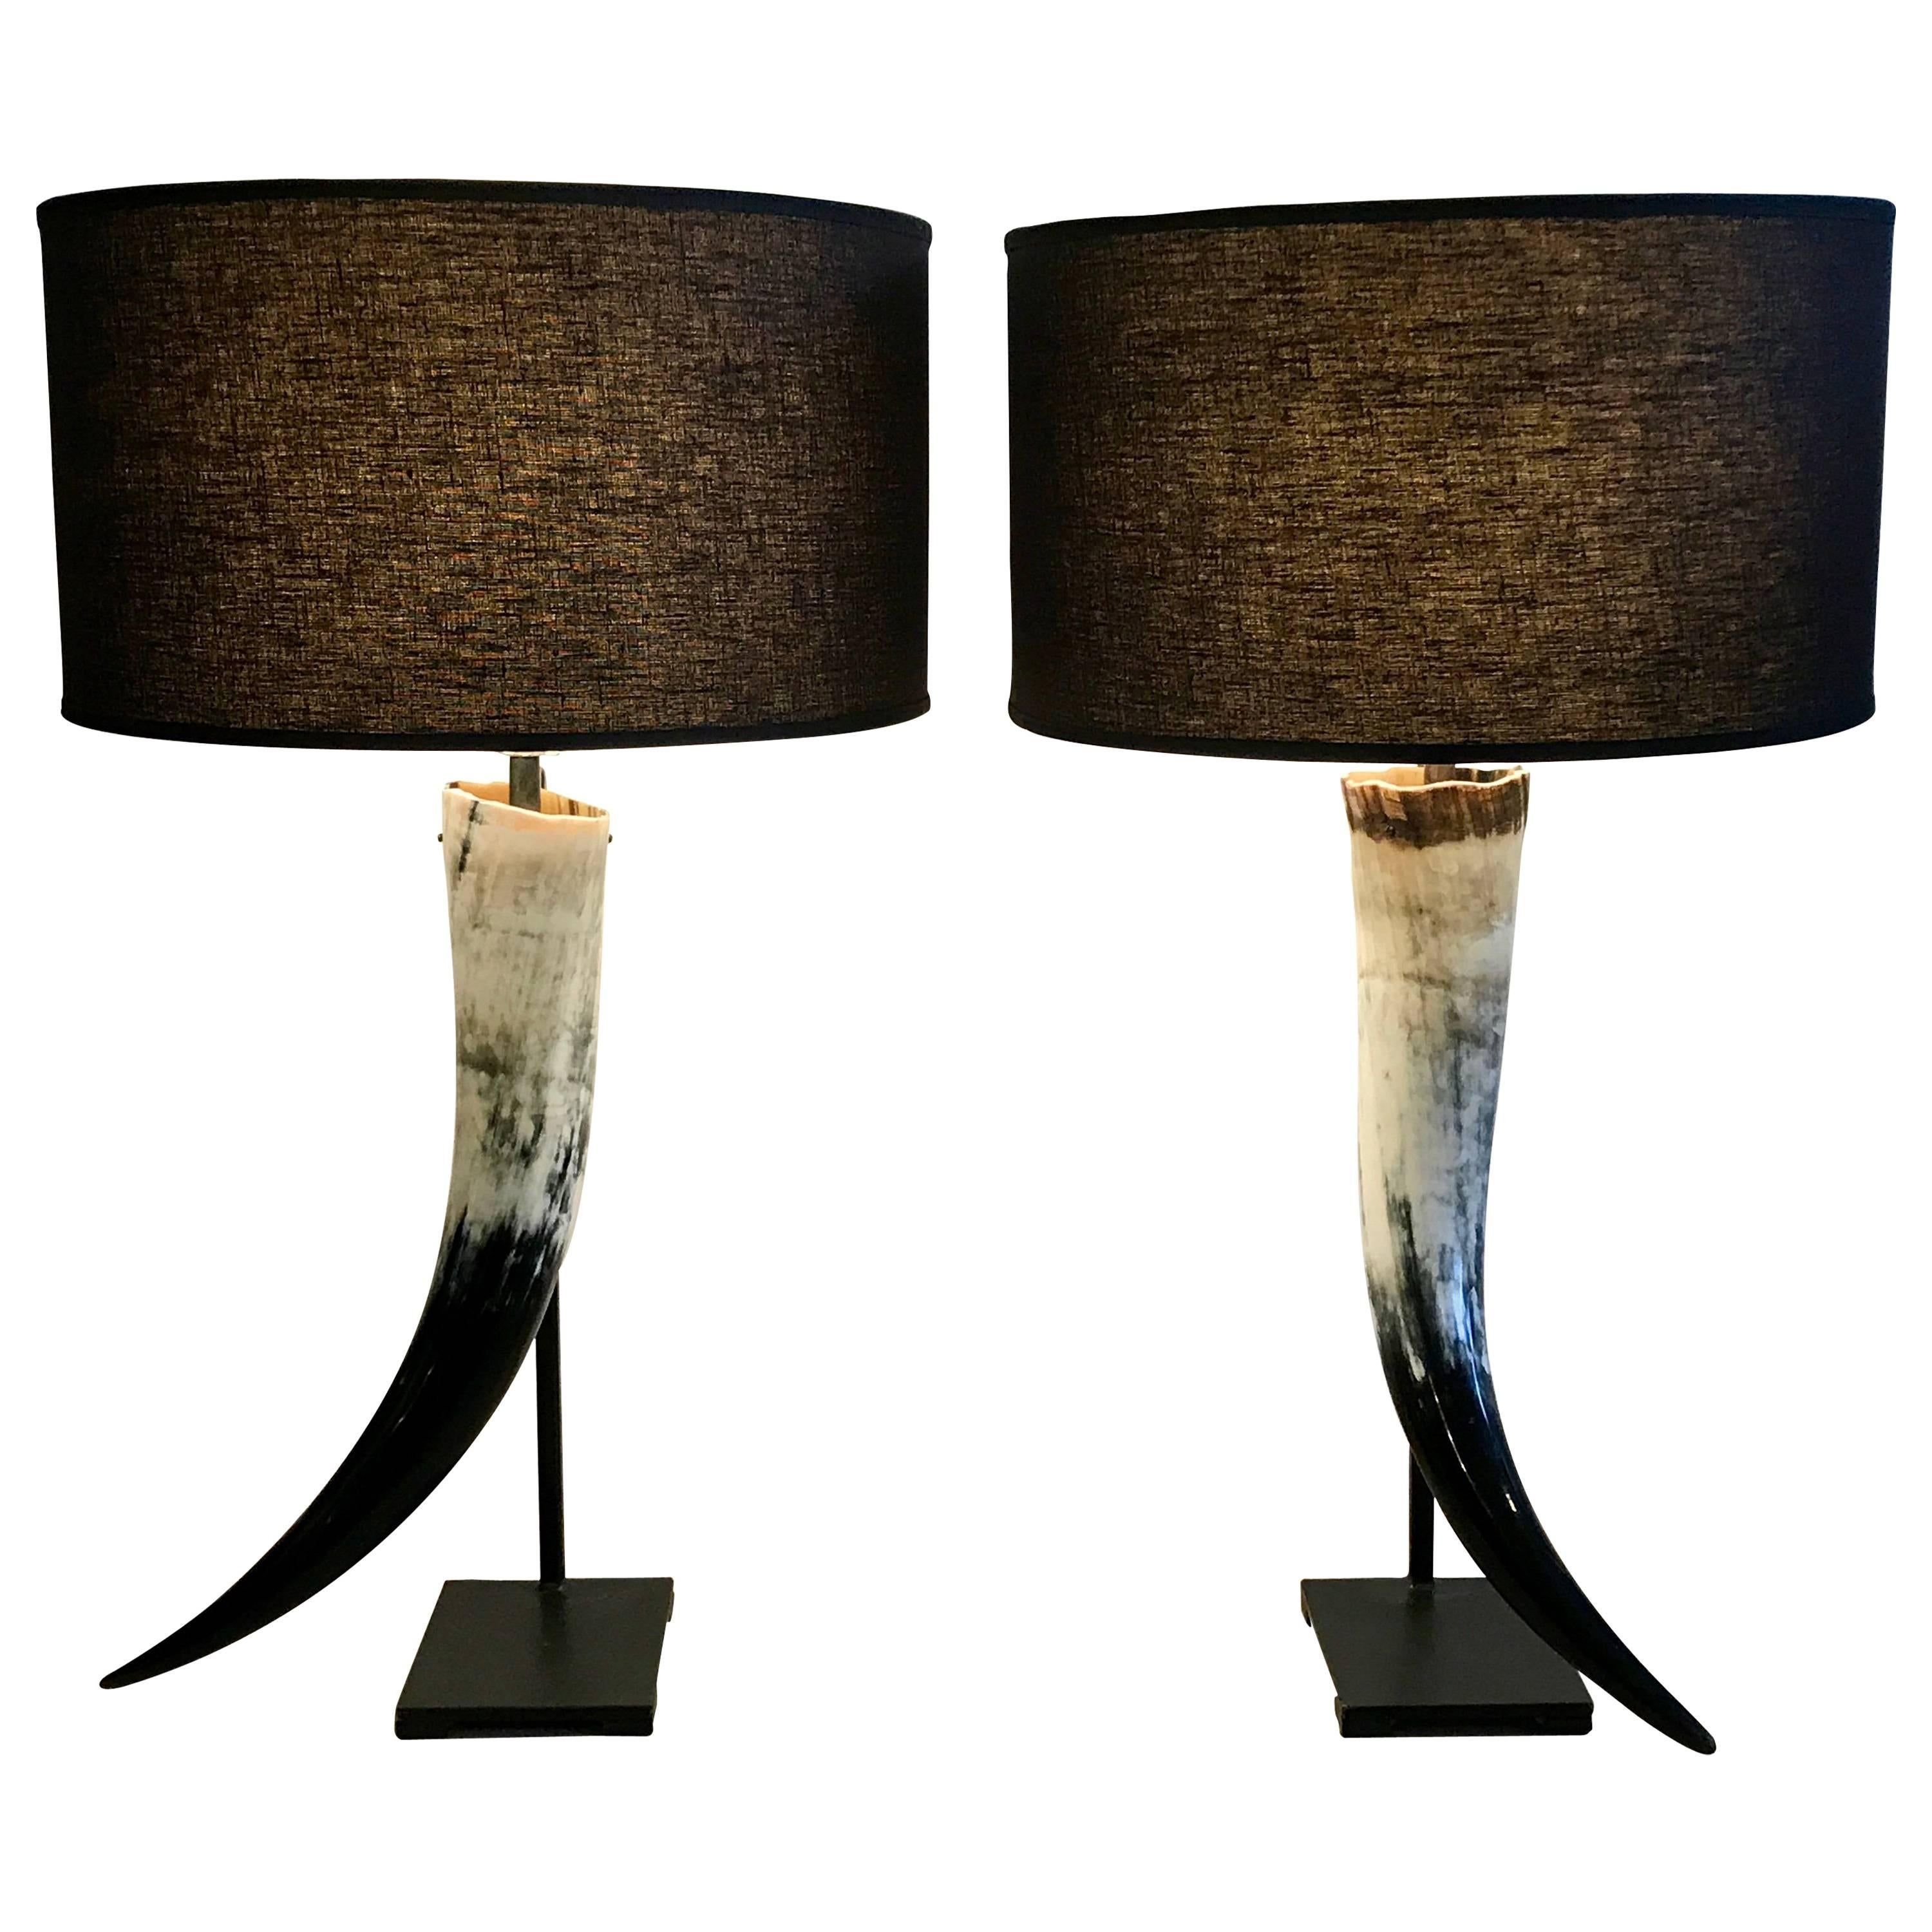 Pair of Authentic Texas Longhorn Table Lamps, Artisan Crafted